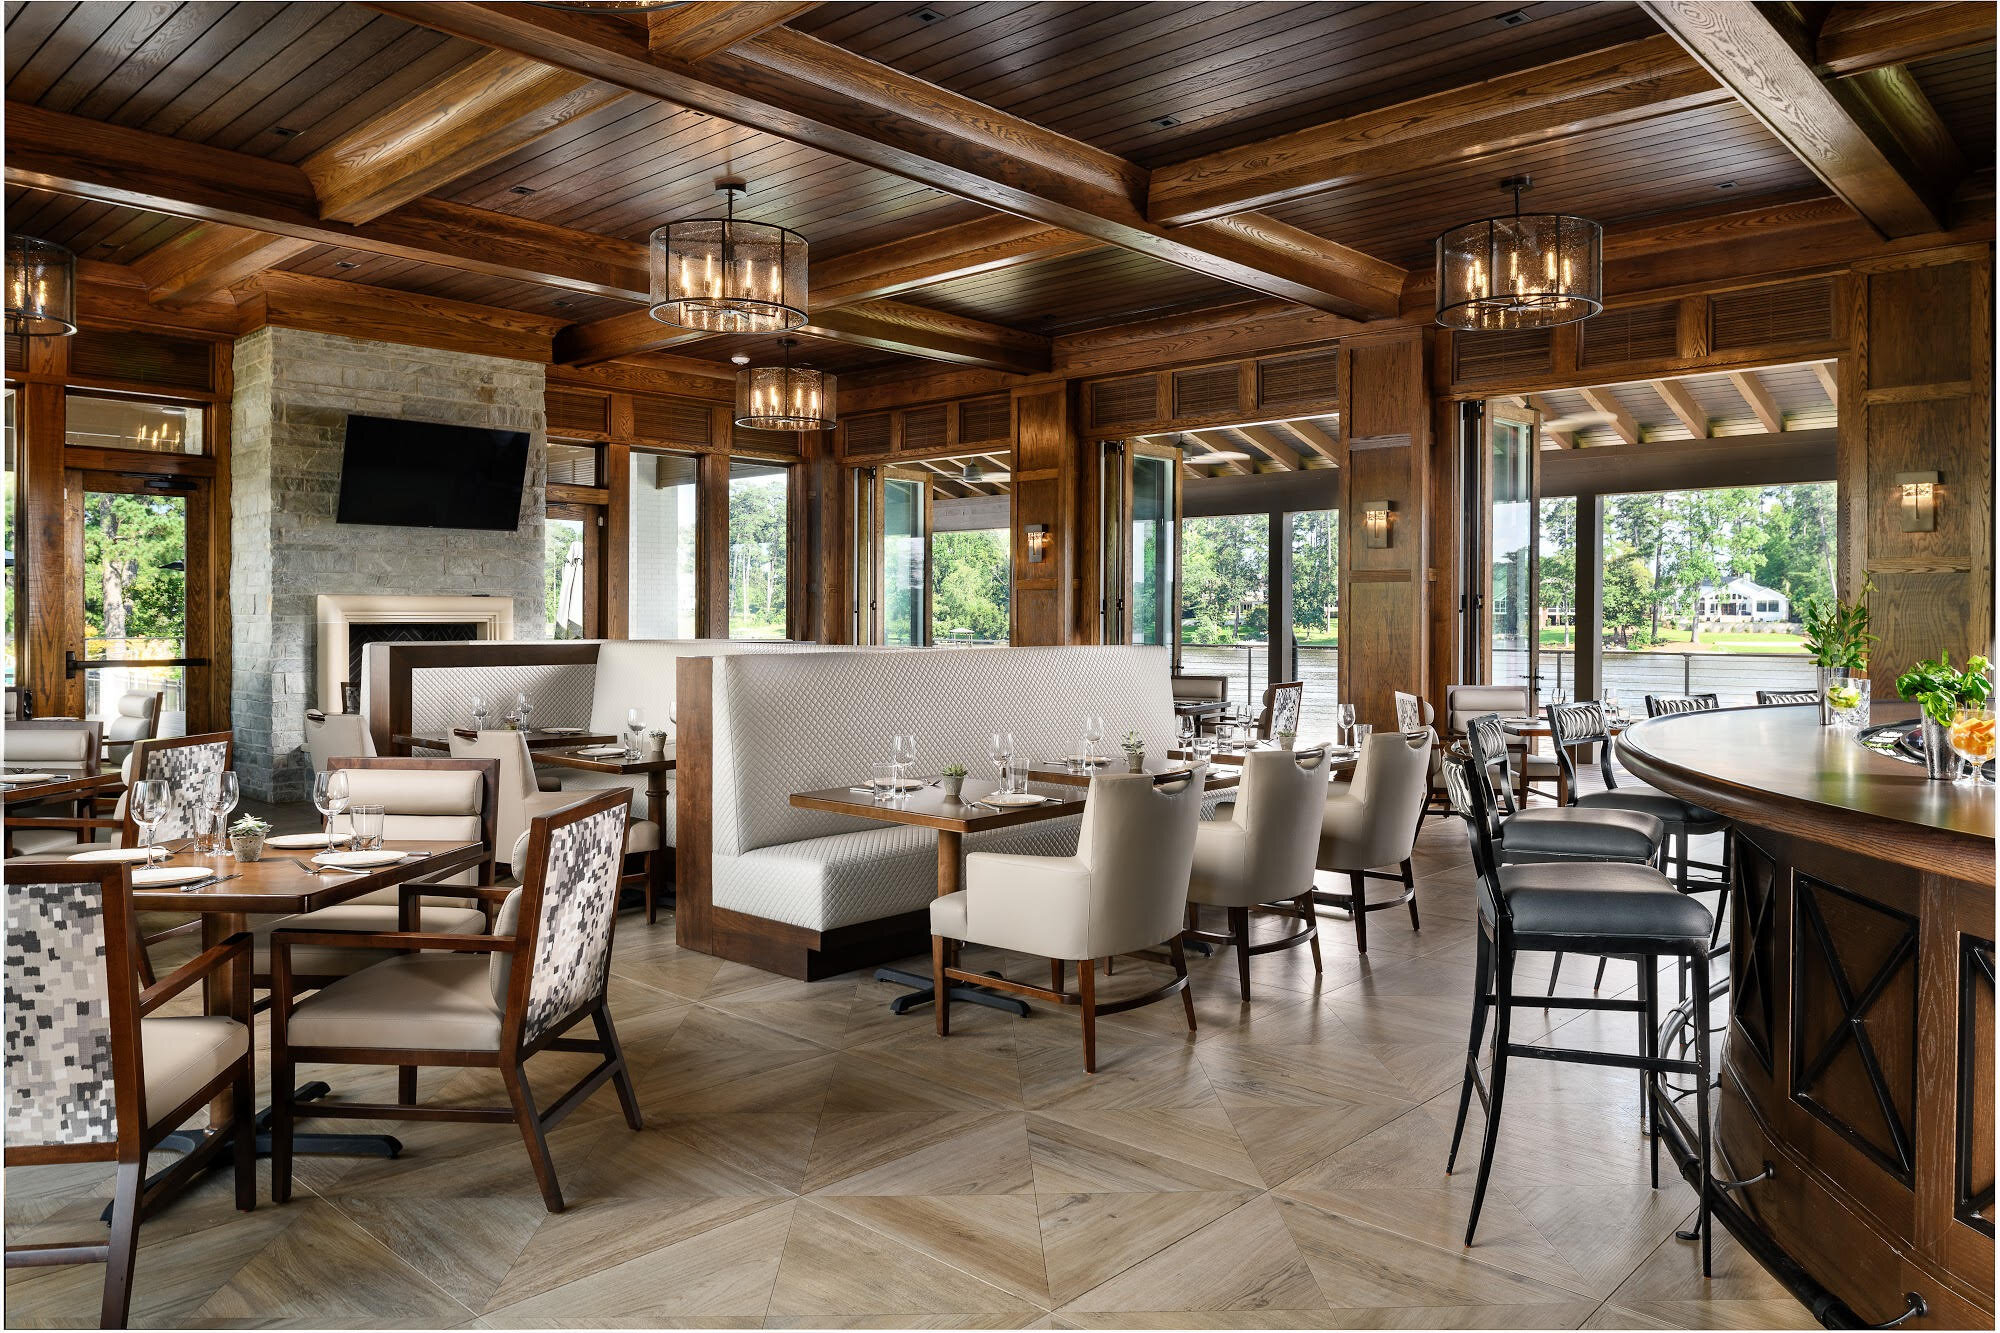 © Traci Rhoads Interior Design, Private Residences and Country Clubs, Lake Toxaway, NC